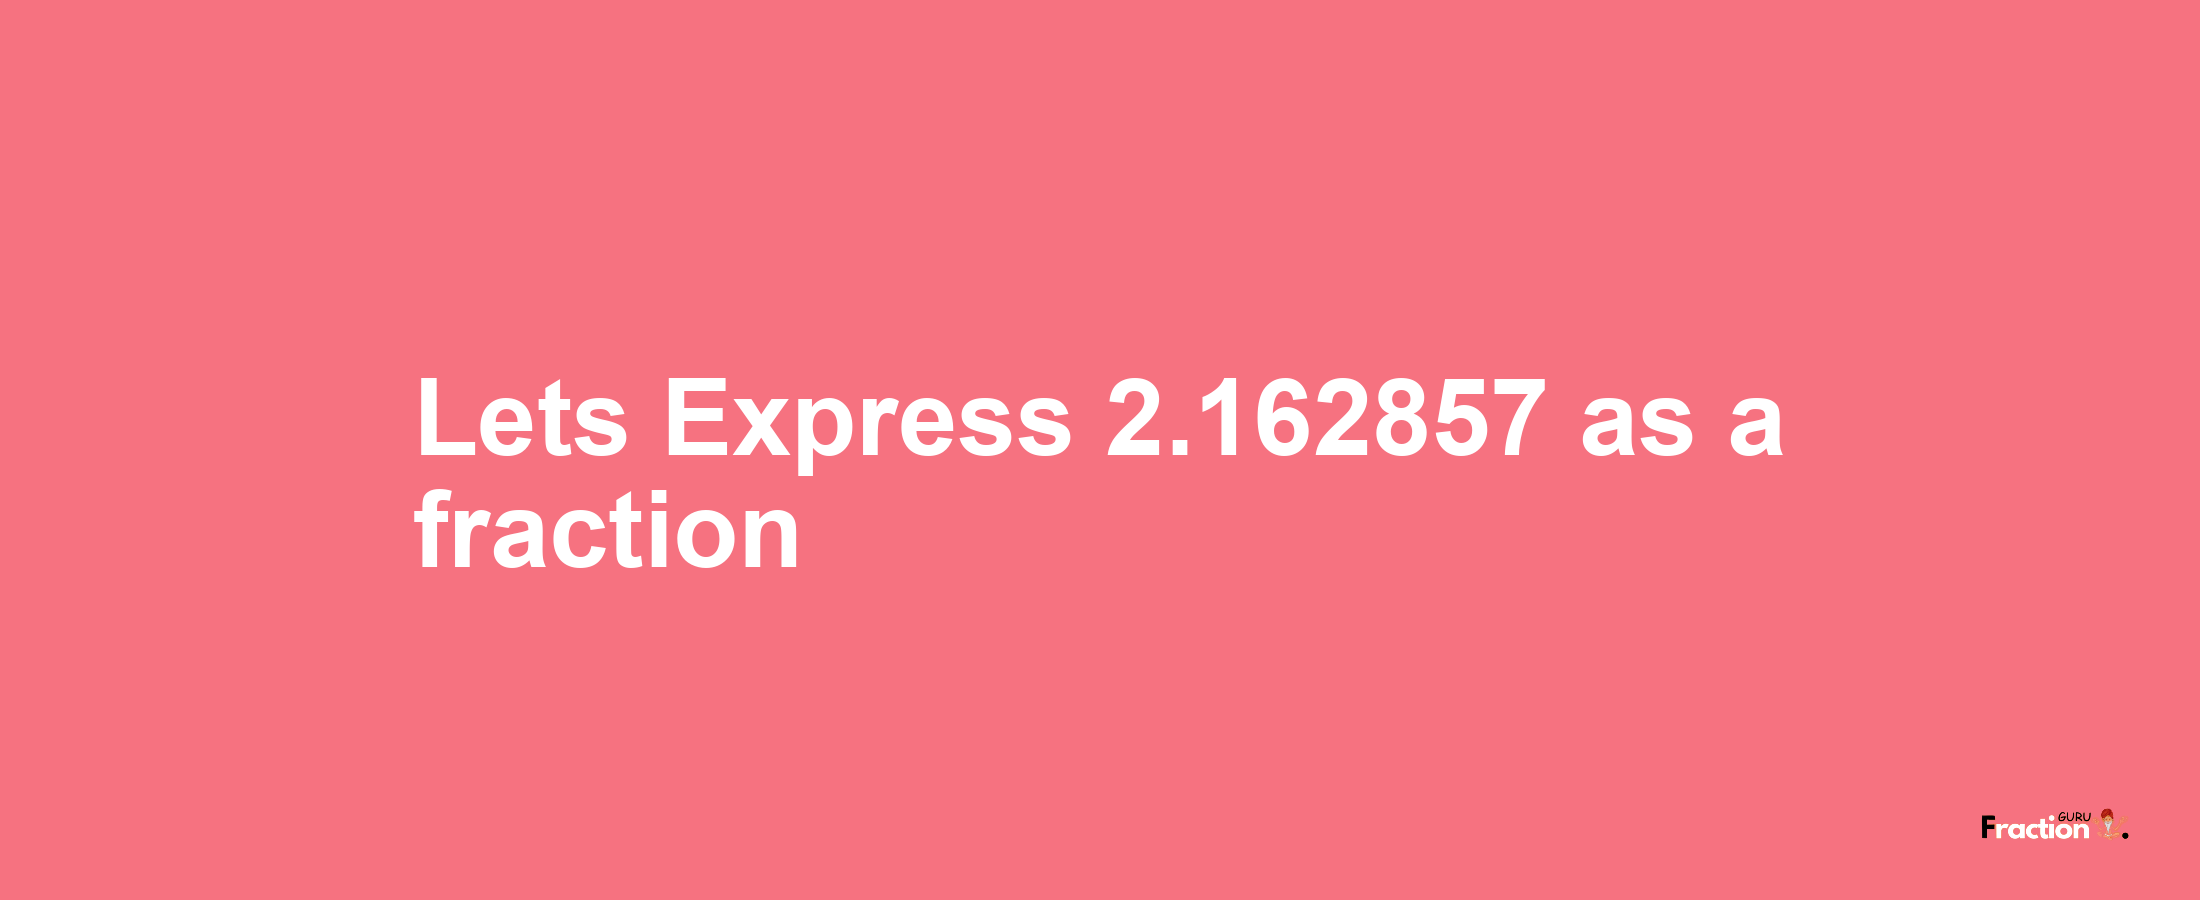 Lets Express 2.162857 as afraction